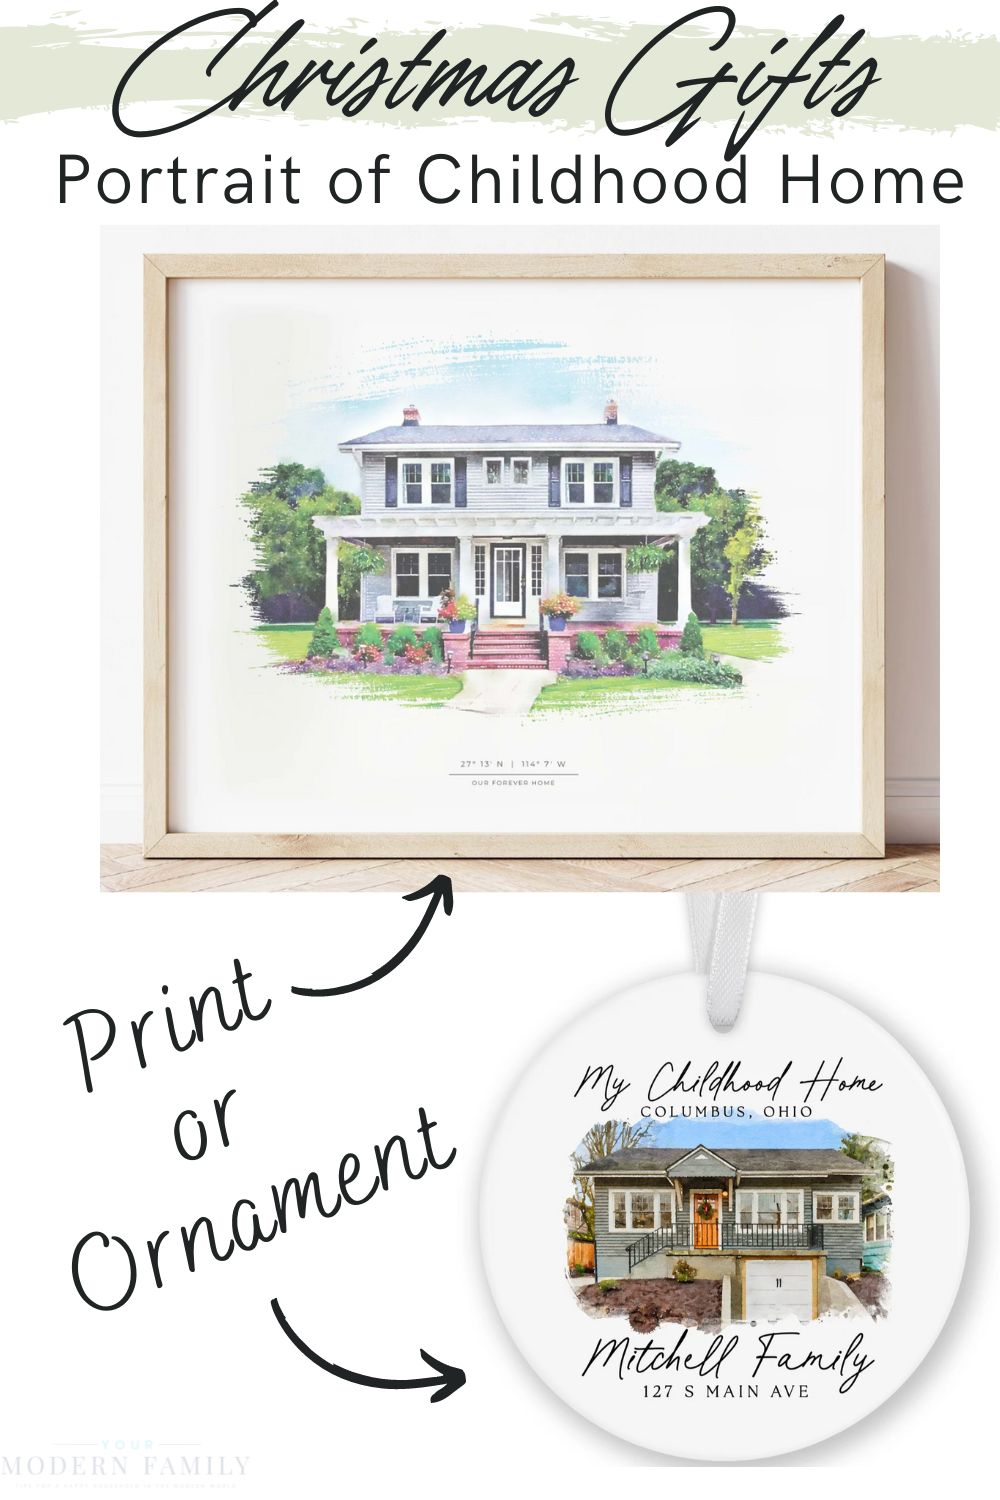 Best Christmas Gifts for Parents - childhood home portrait